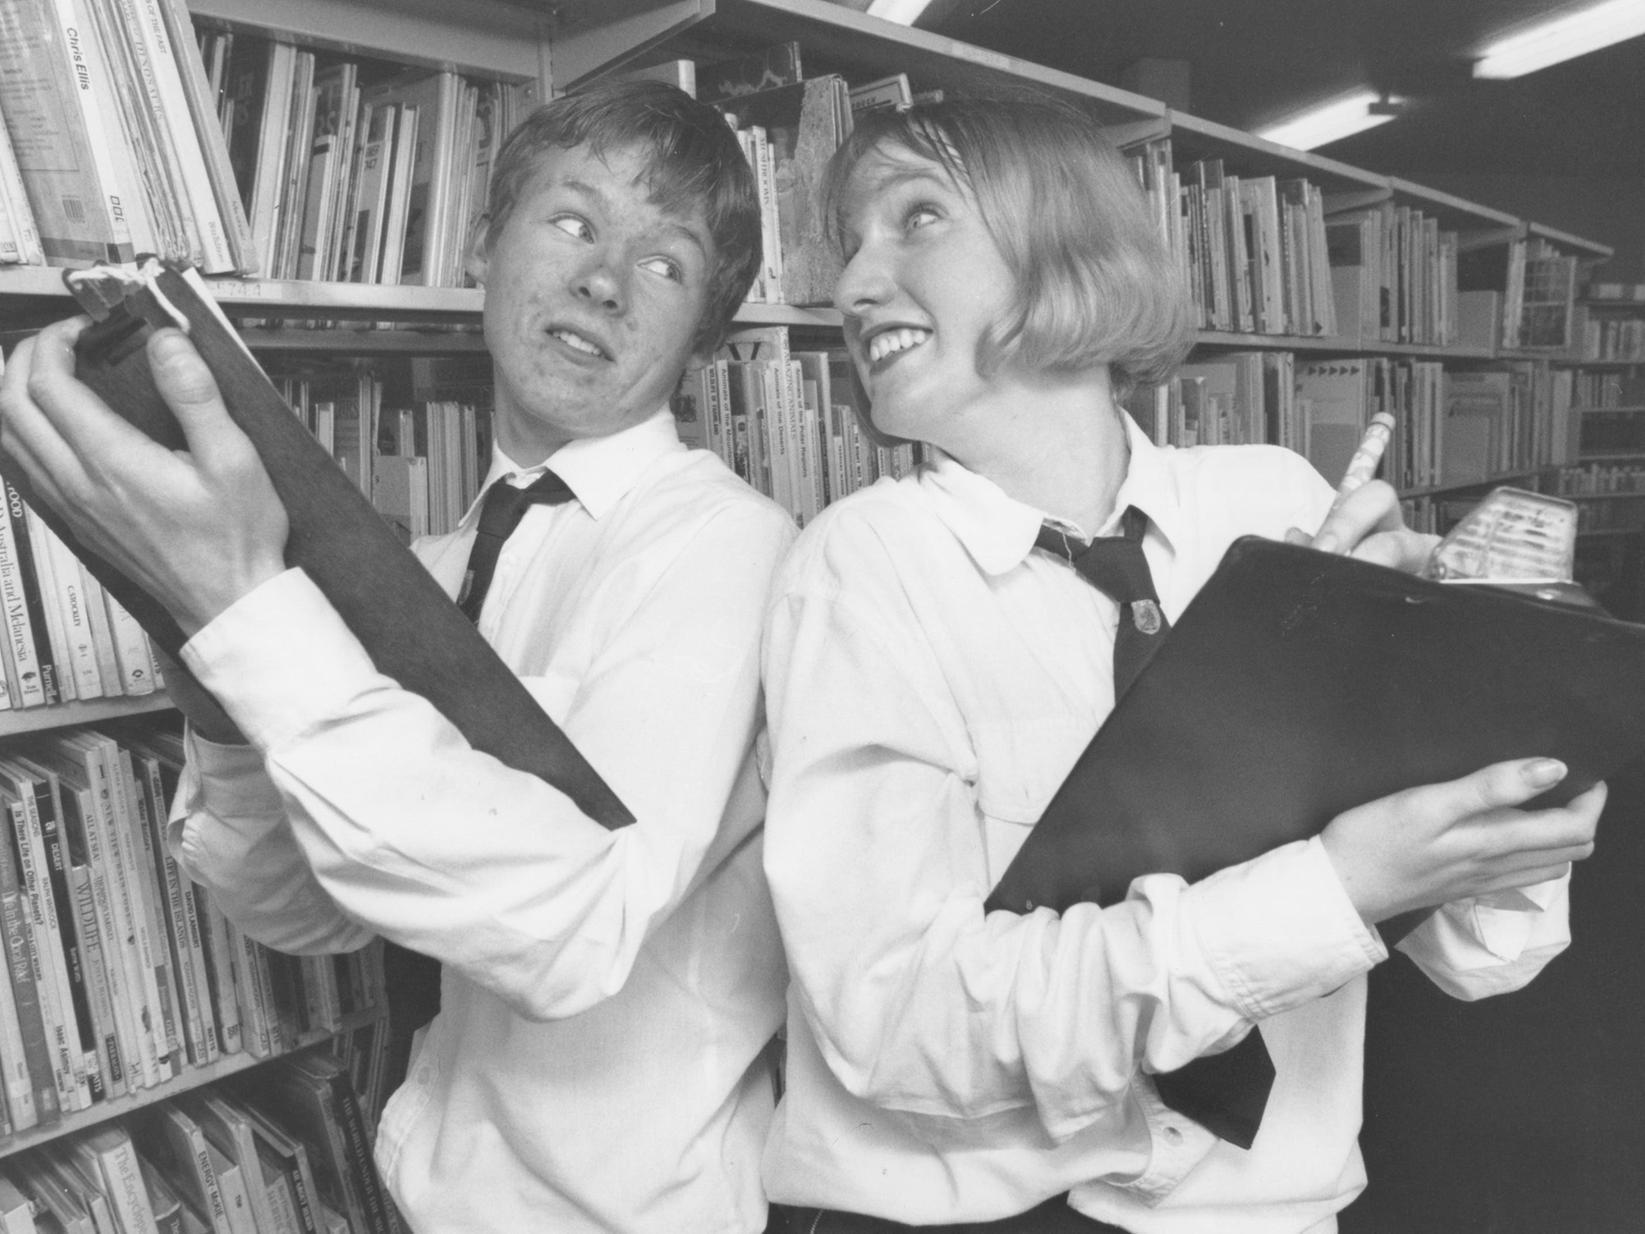 Pindar School pupils Andrew O'Neill and Jackie Hepples put their heads together to check their results following a recent project that involved interviewing prospective new teachers in March 1997.